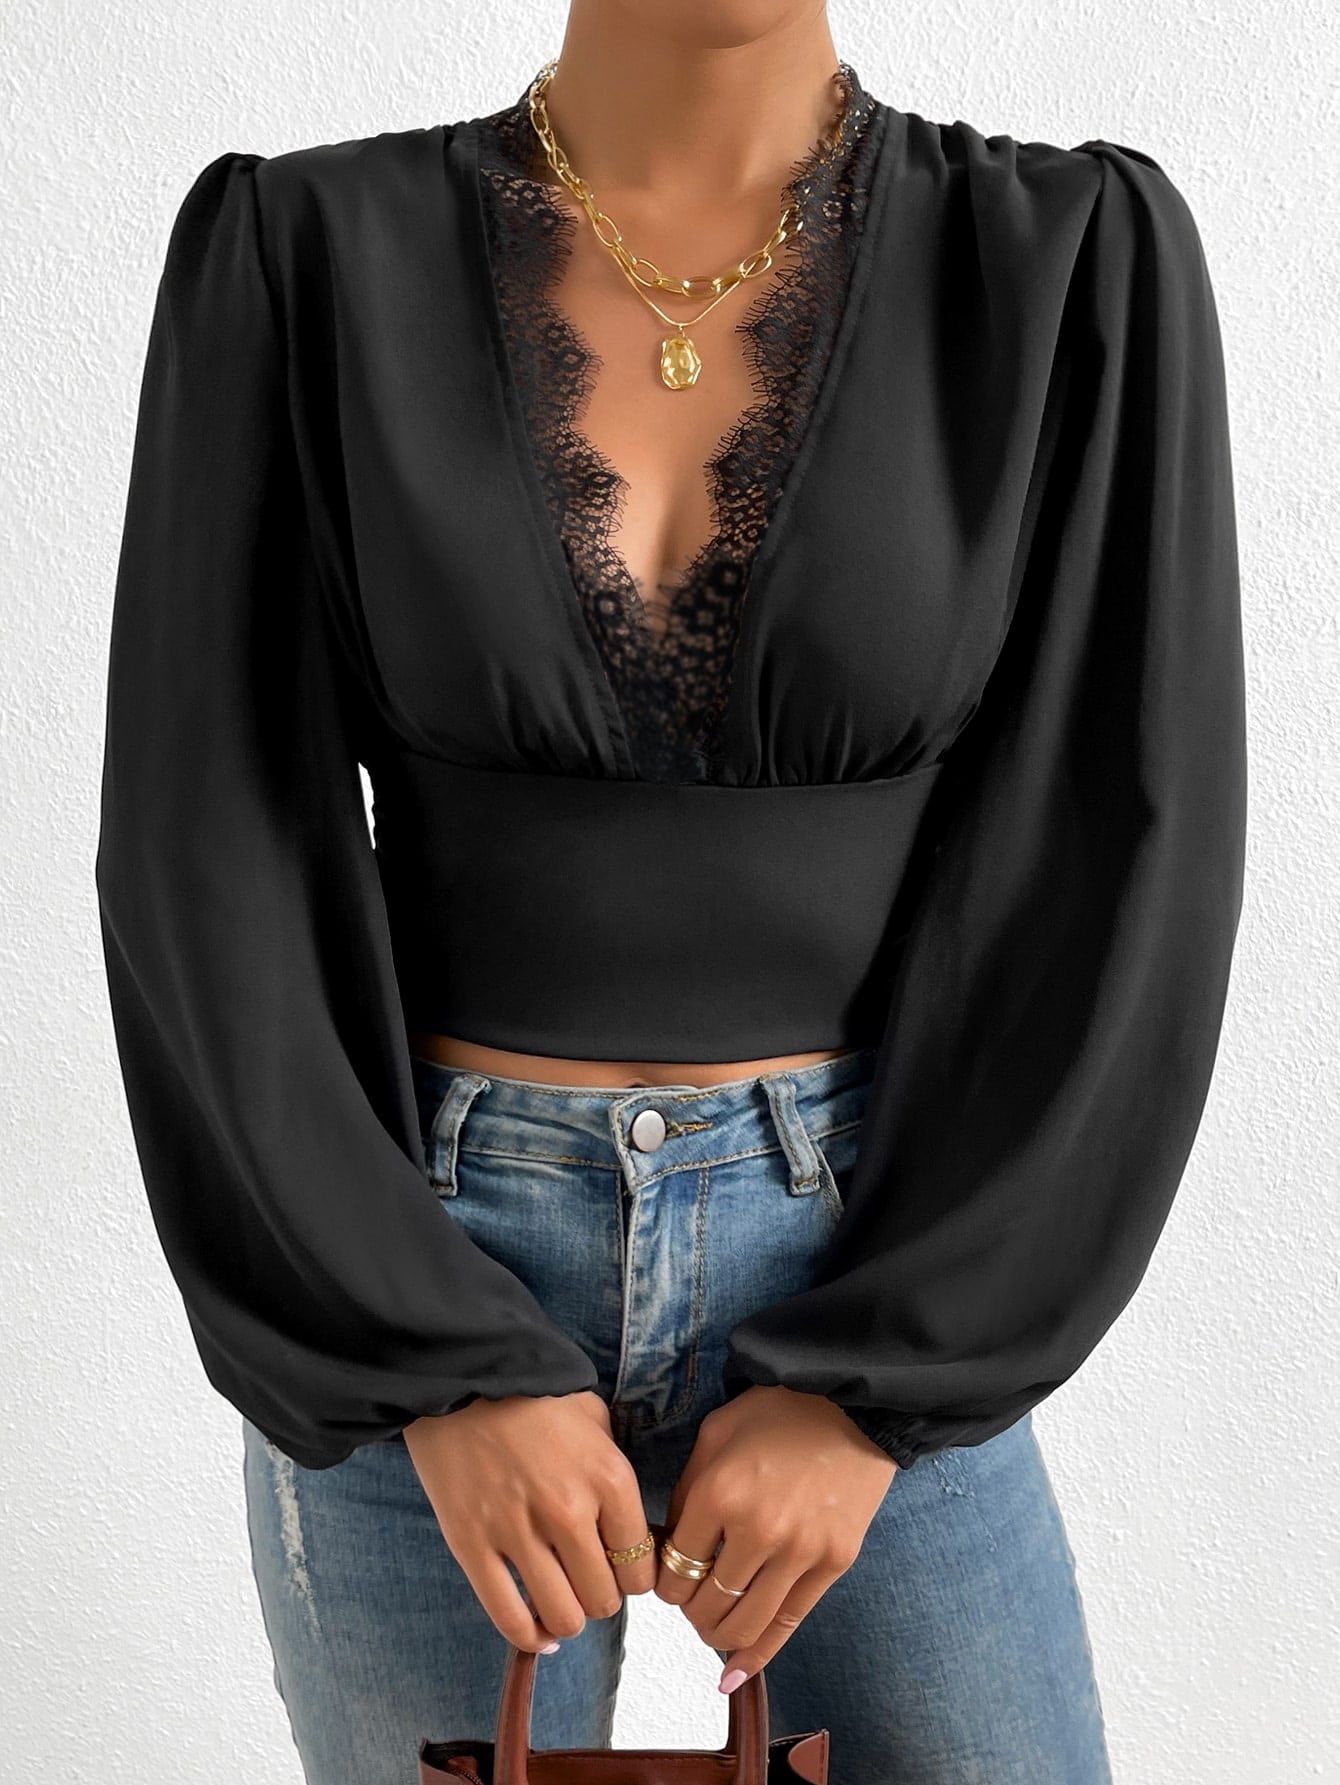 Sexy Long Sleeves Lace Tops for Women-Shirts & Tops-Black-S-Free Shipping at meselling99